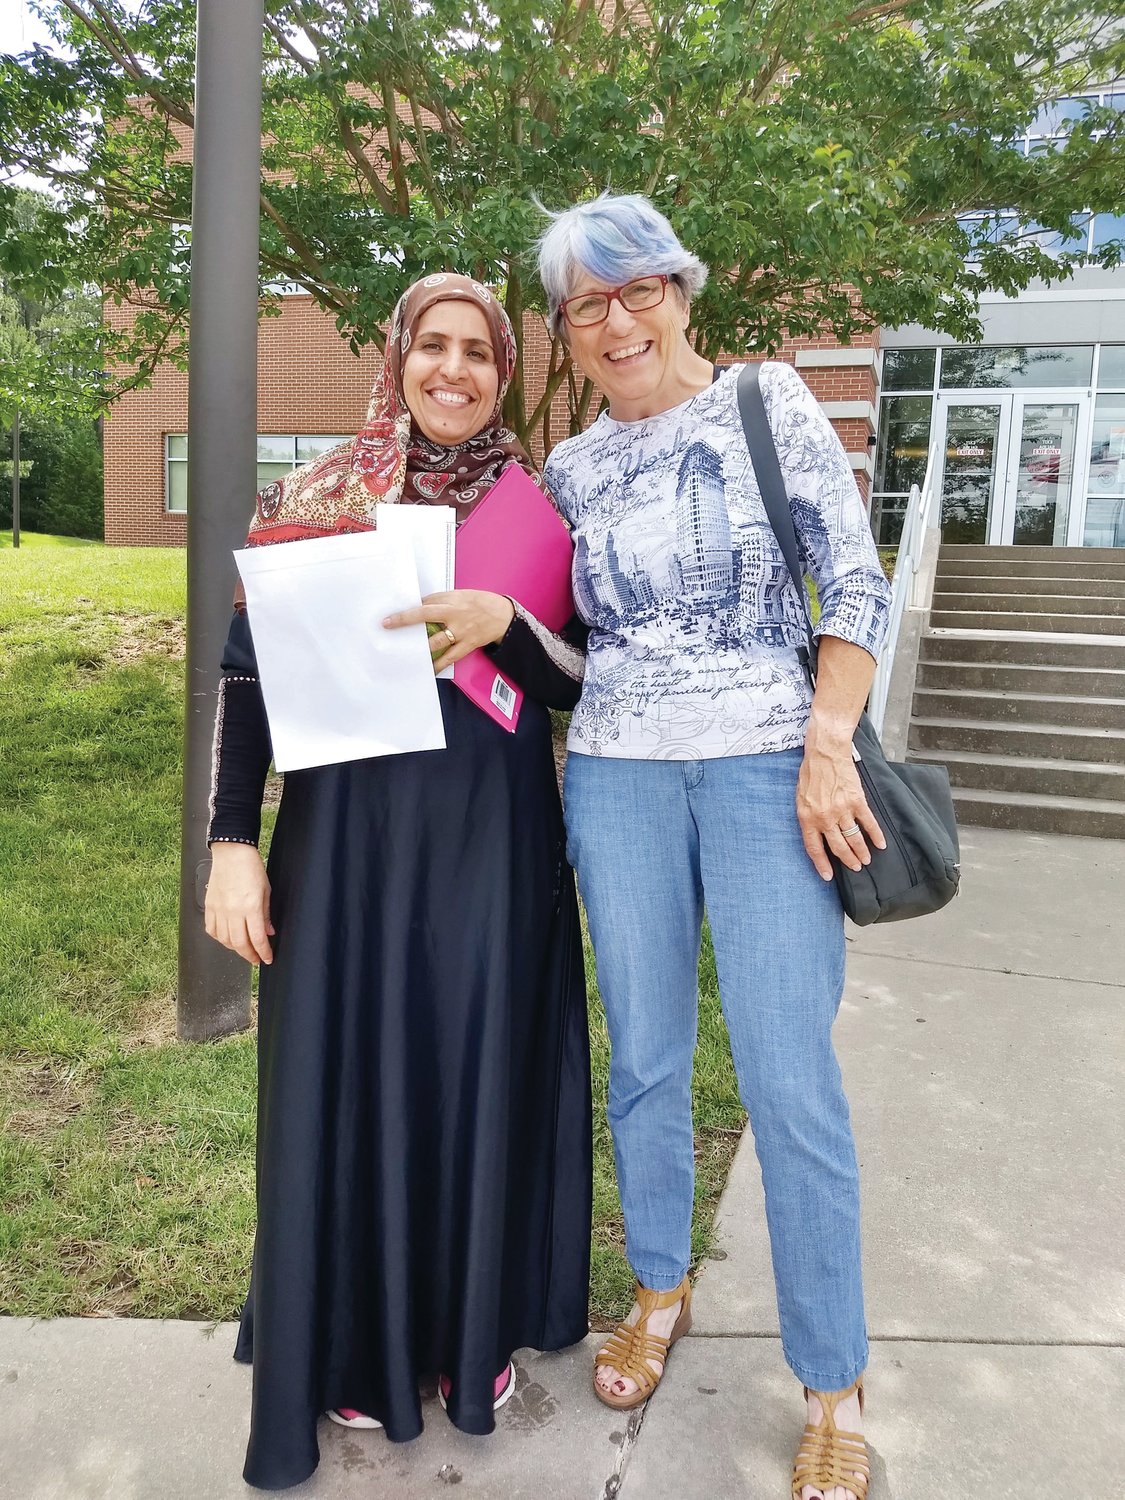 Suryah Zahmadi with her Chatham Literacy citizenship tutor, Joanne Caye, in front of the Raleigh-Durham USCIS office on June 10, 2019, the day she passed her citizenship exam.